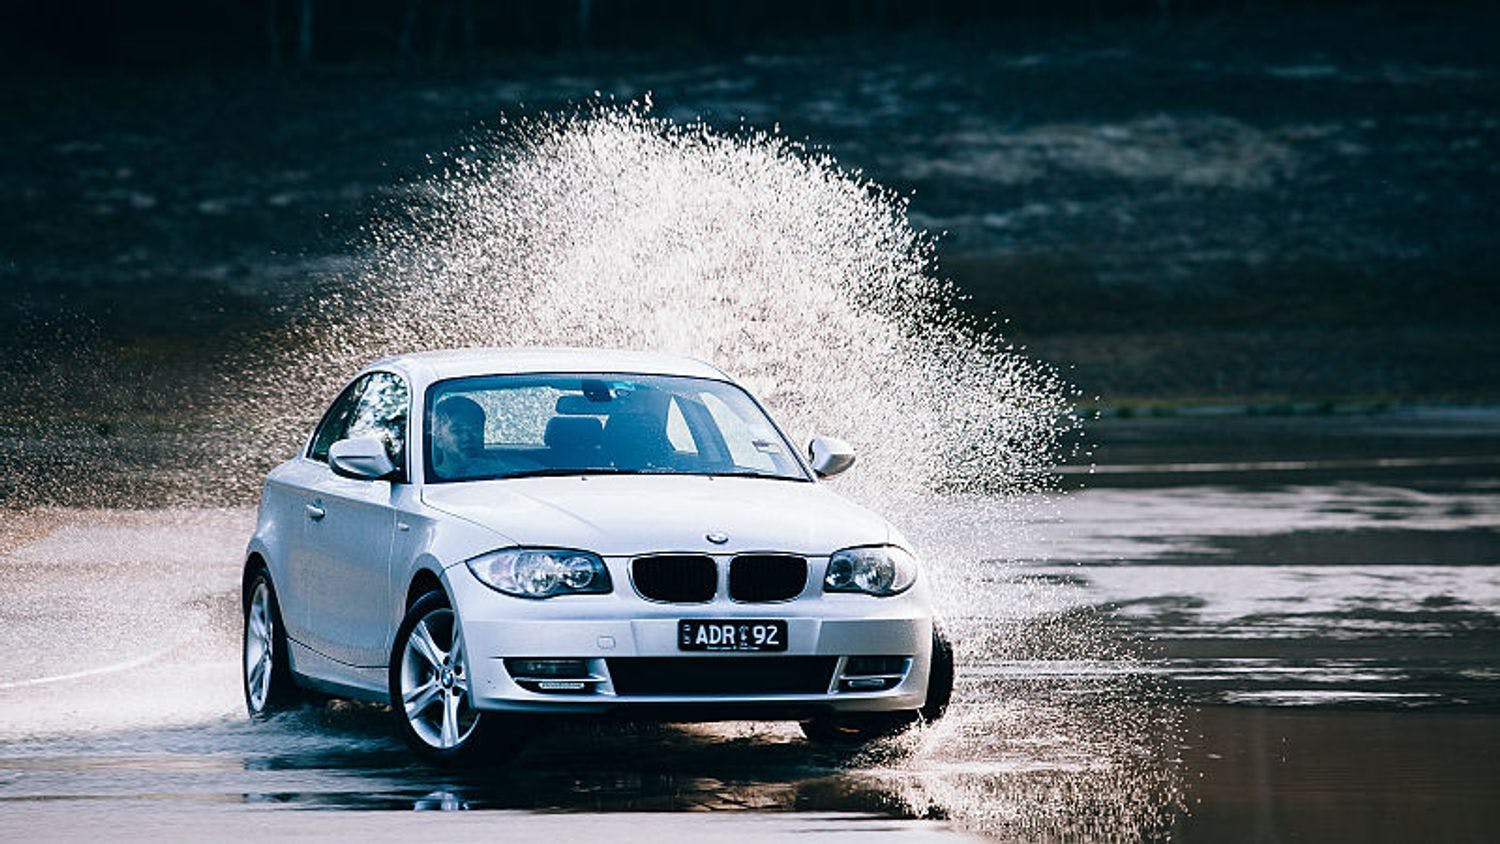 Aquaplaning: How to prevent it and how to manage it?